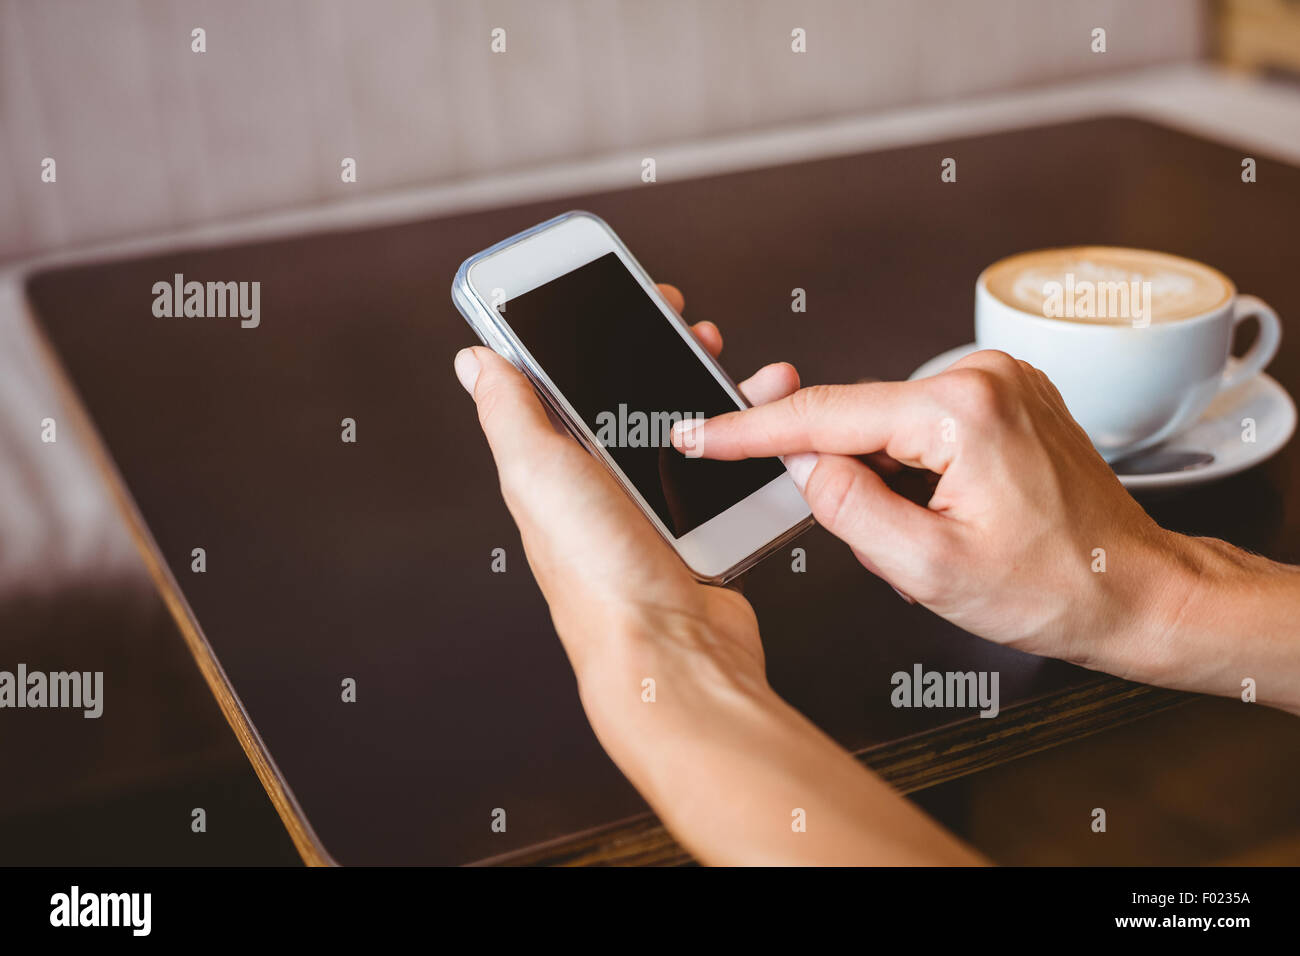 Hand of woman holding smartphone Stock Photo